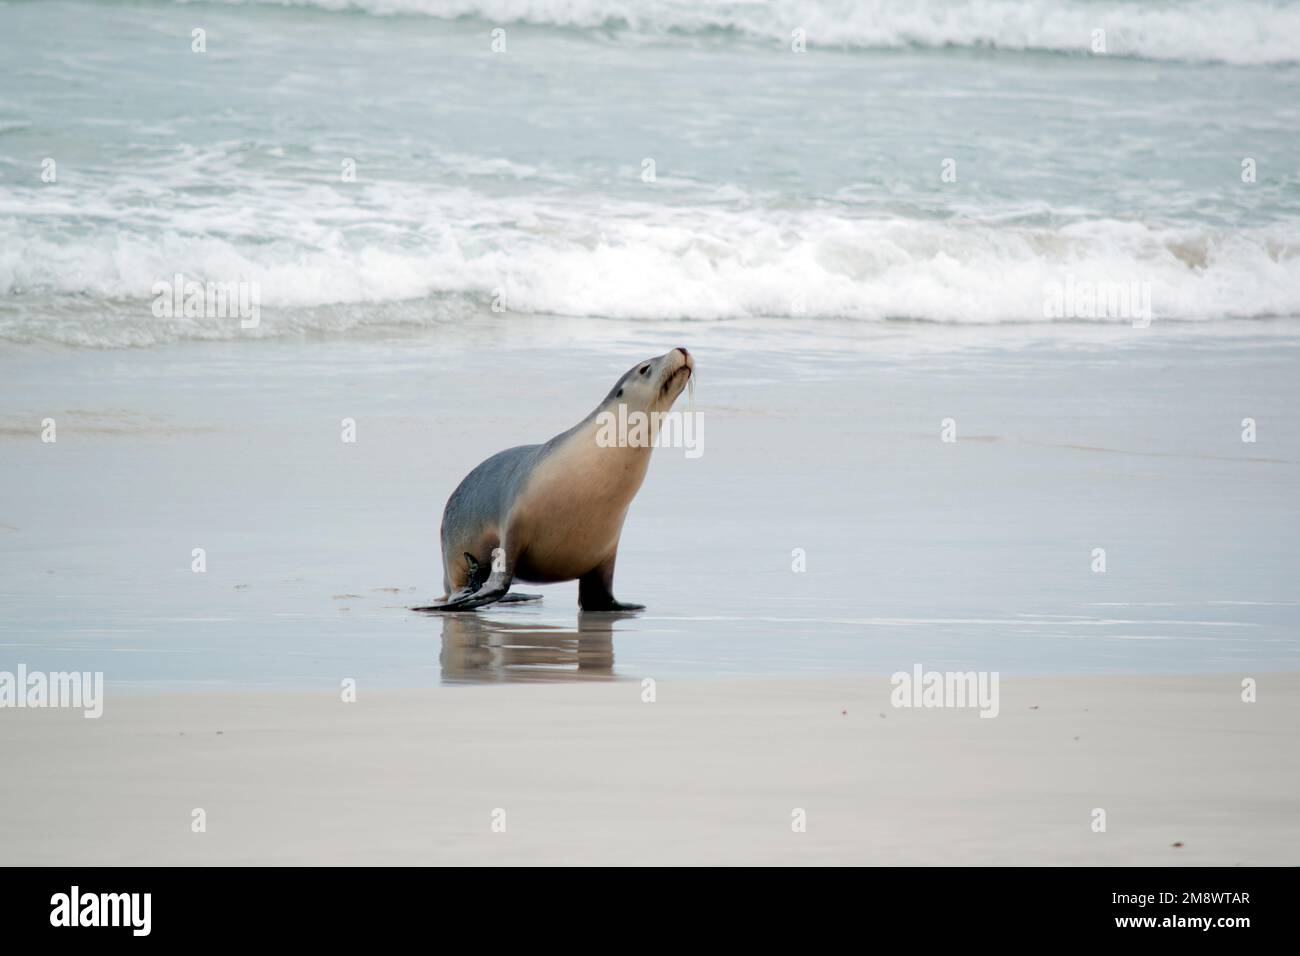 the sea lion is coming ashore at seal bay Stock Photo